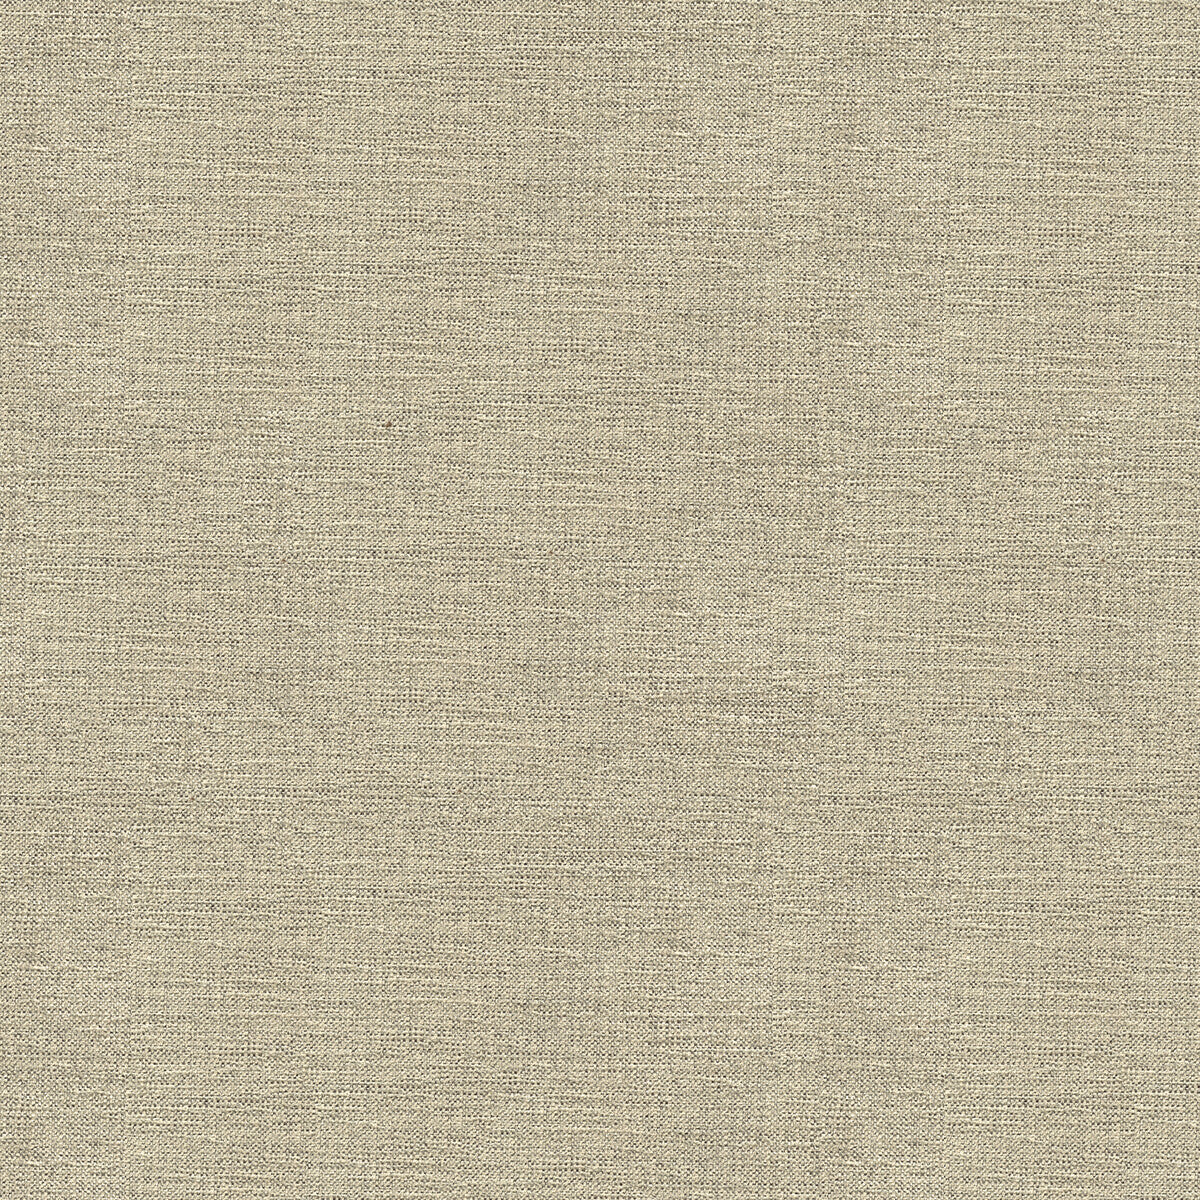 Kravet Contract fabric in 33876-1611 color - pattern 33876.1611.0 - by Kravet Contract in the Crypton Incase collection